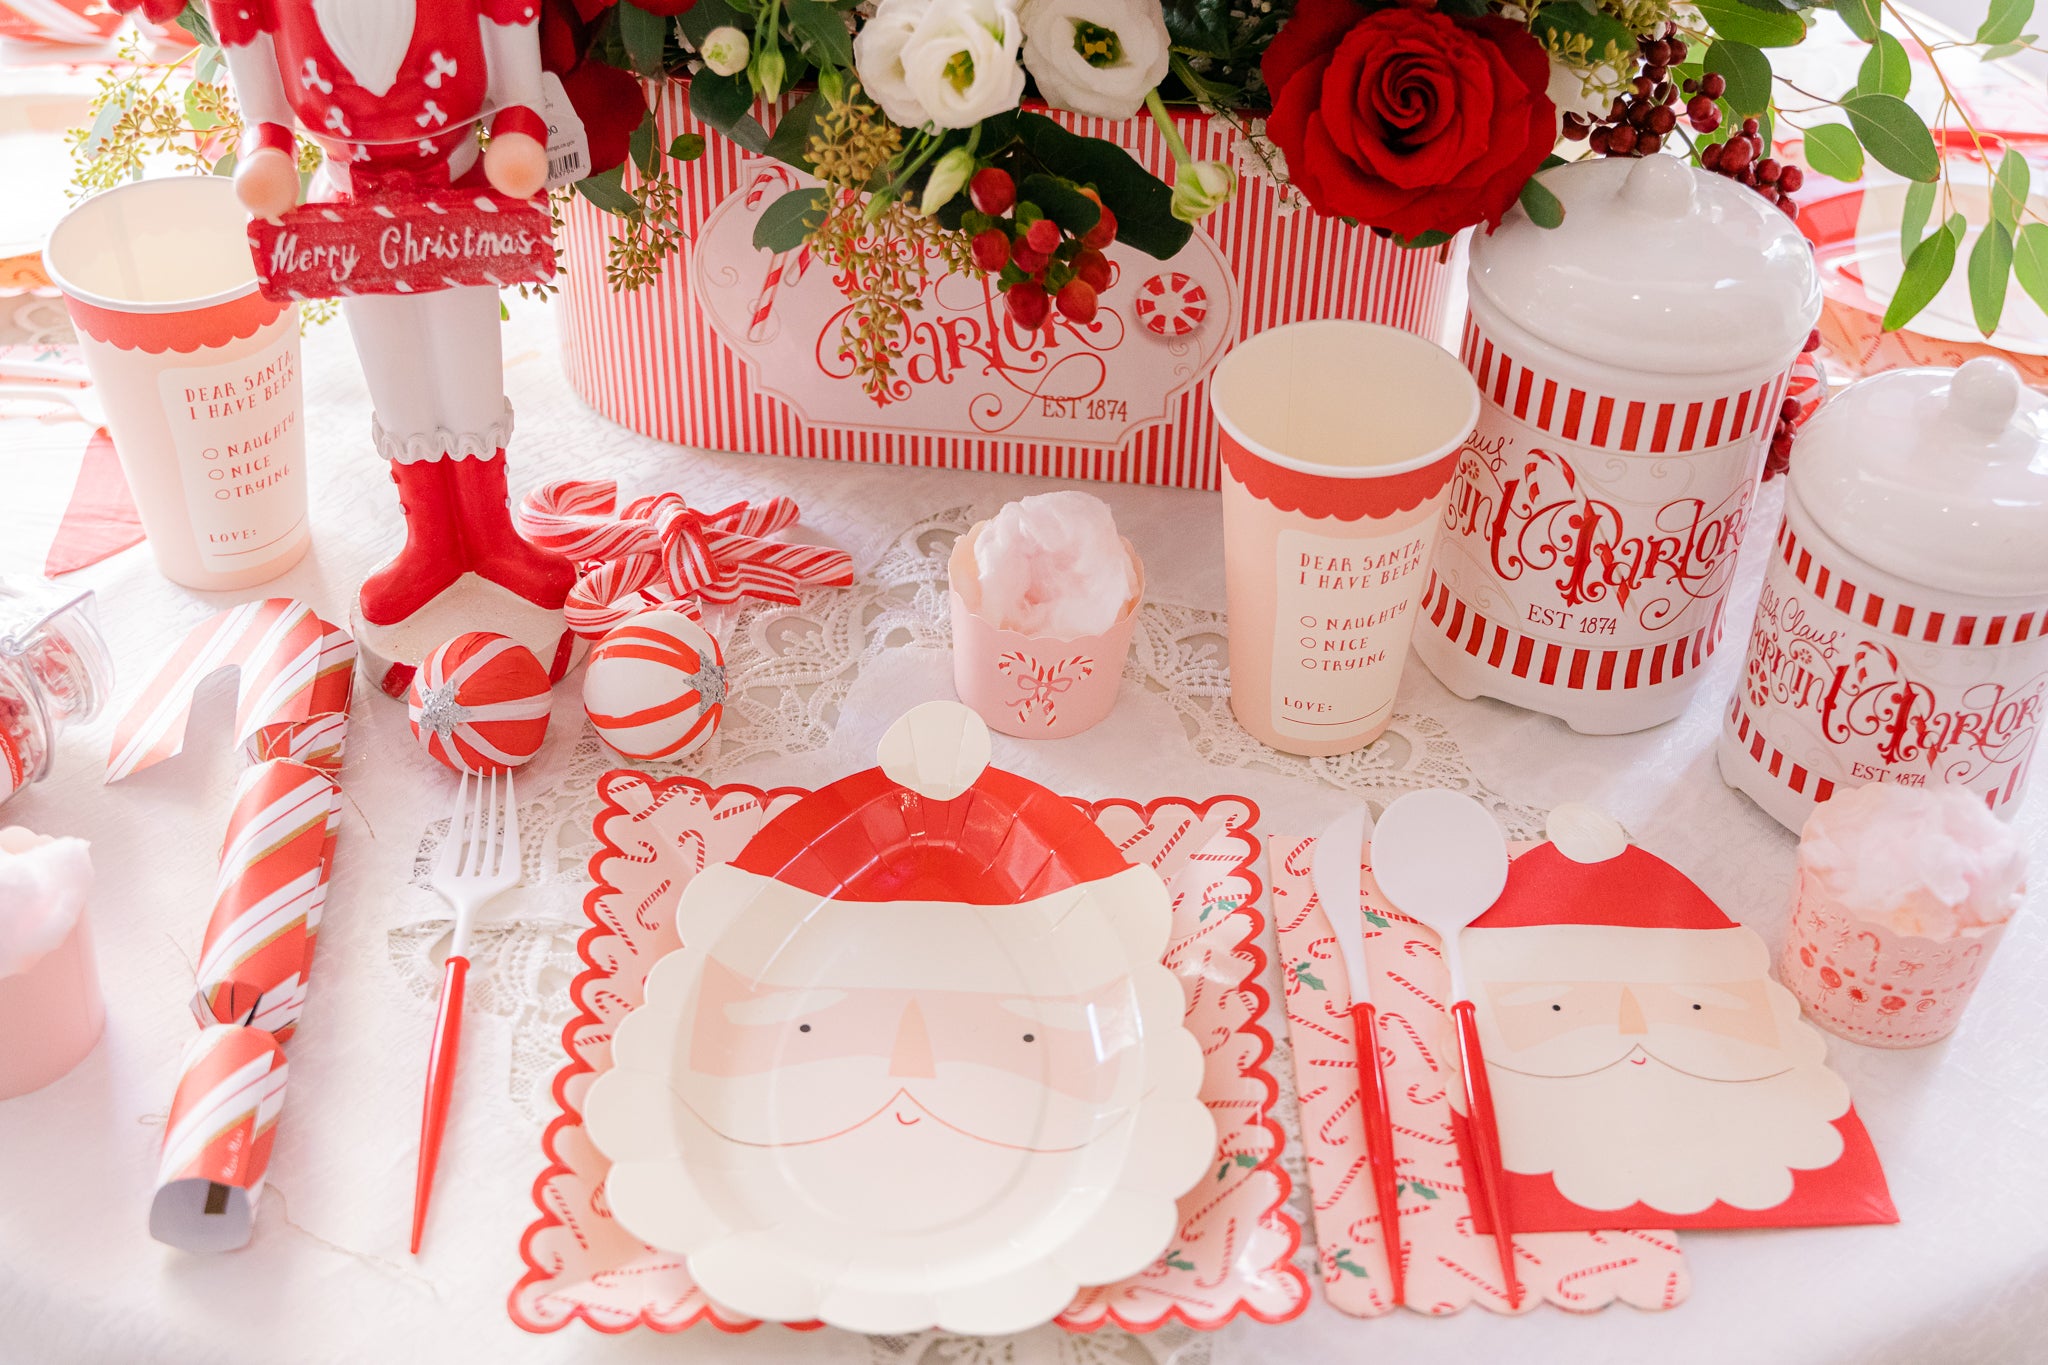 Red and white peppermint Christmas party supplies and decorations.